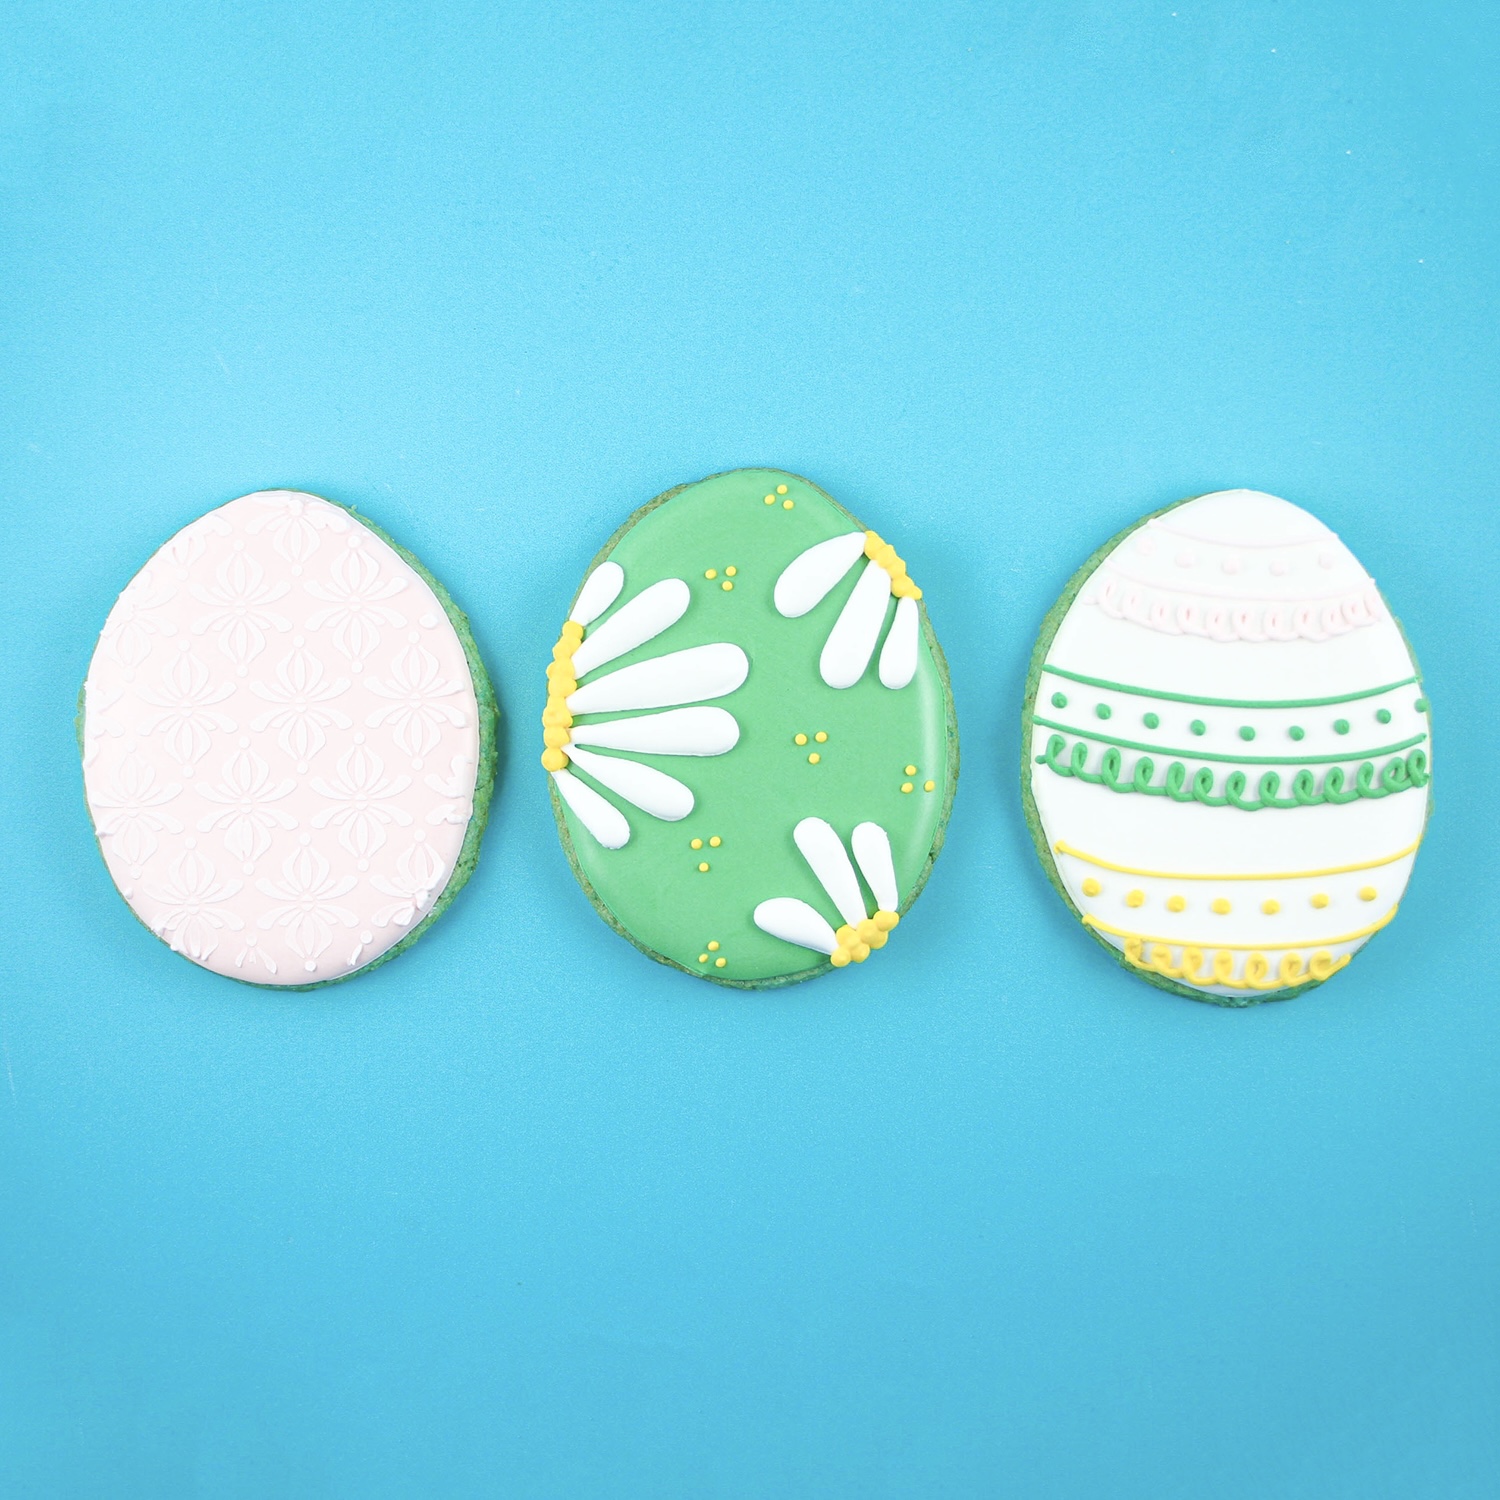 Three royal icing decorated easter eggs on blue sugar cookies